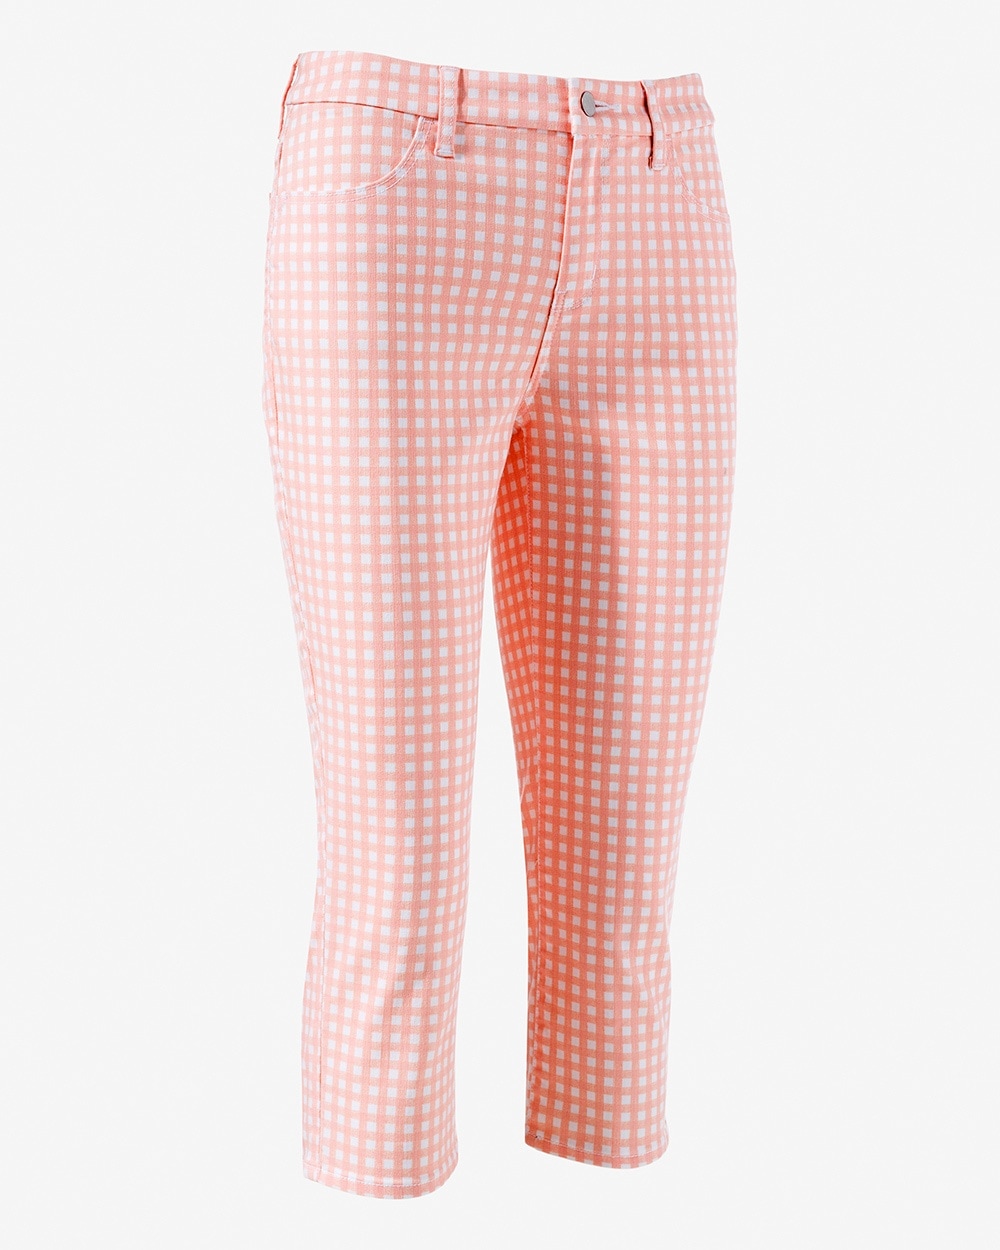 Classic Gingham Girlfriend Ankle Jeans